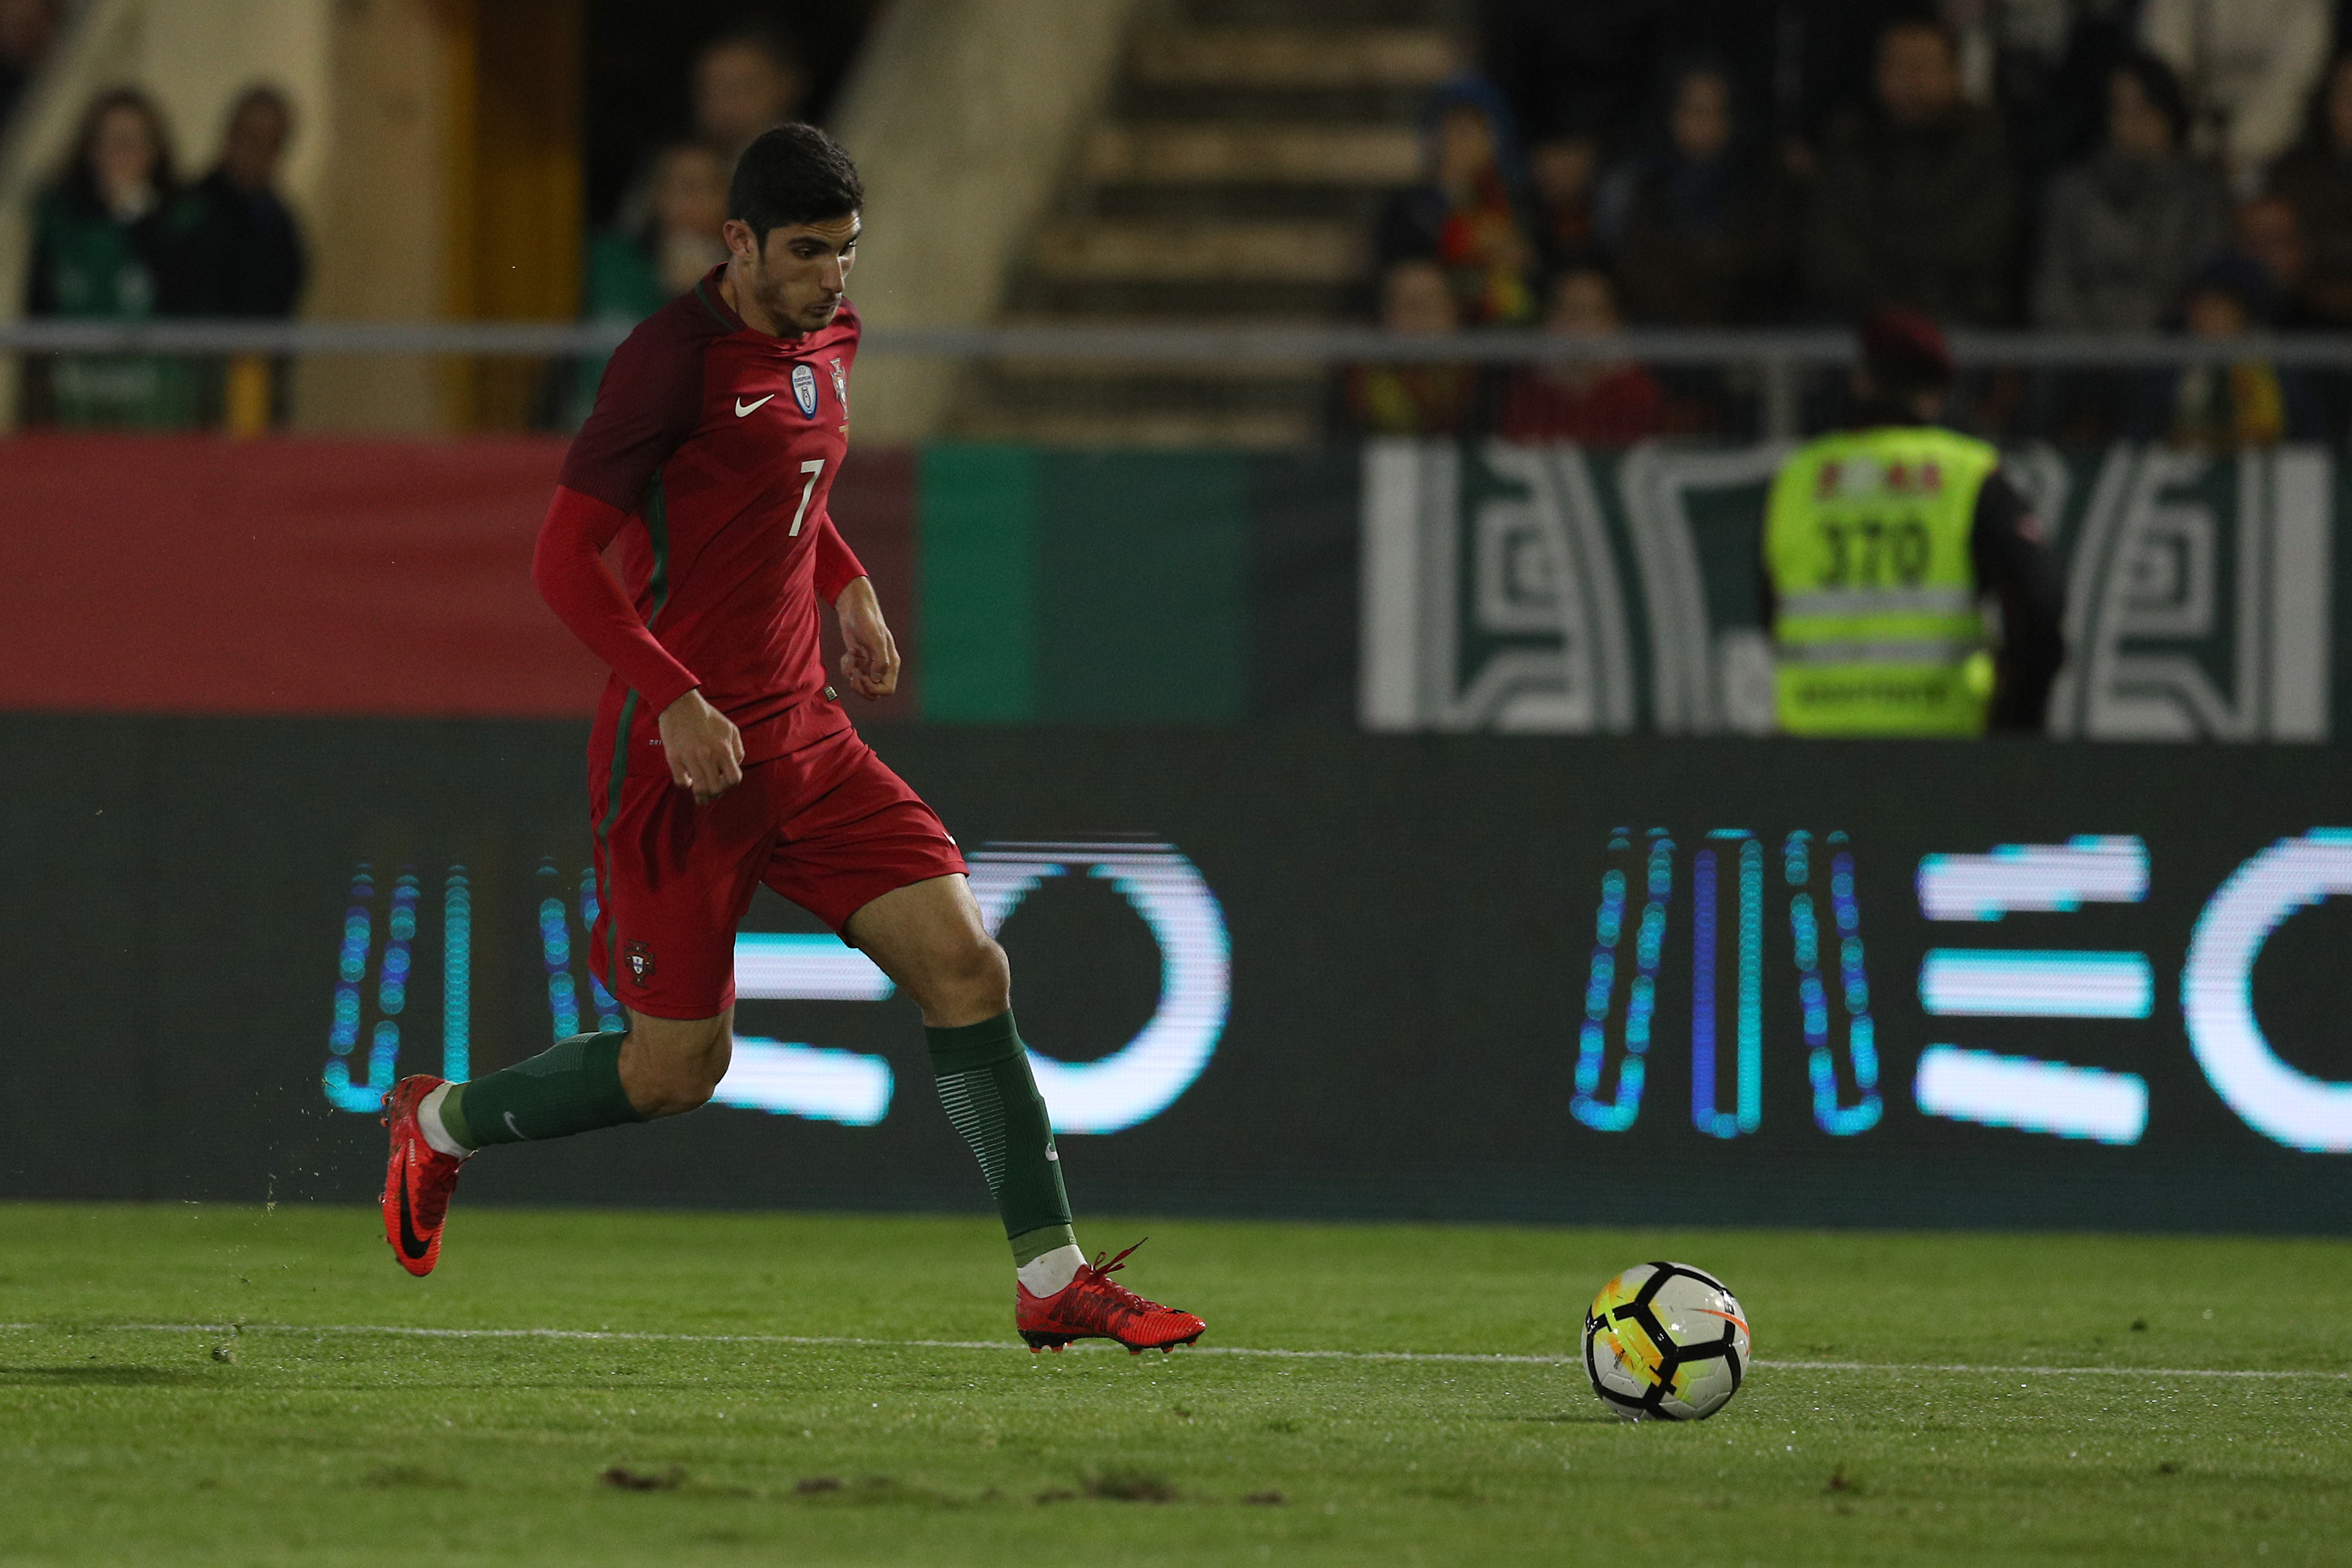 VISEU, PORTUGAL -NOVEMBER 10: Portugal forward Goncalo Guedes during the match between Portugal and Saudi Arabia InternationalFriendly at Estadio do Fontelo, on November 10, 2017 in Viseu, Portugal.  (Photo by Carlos Rodrigues/Getty Images)